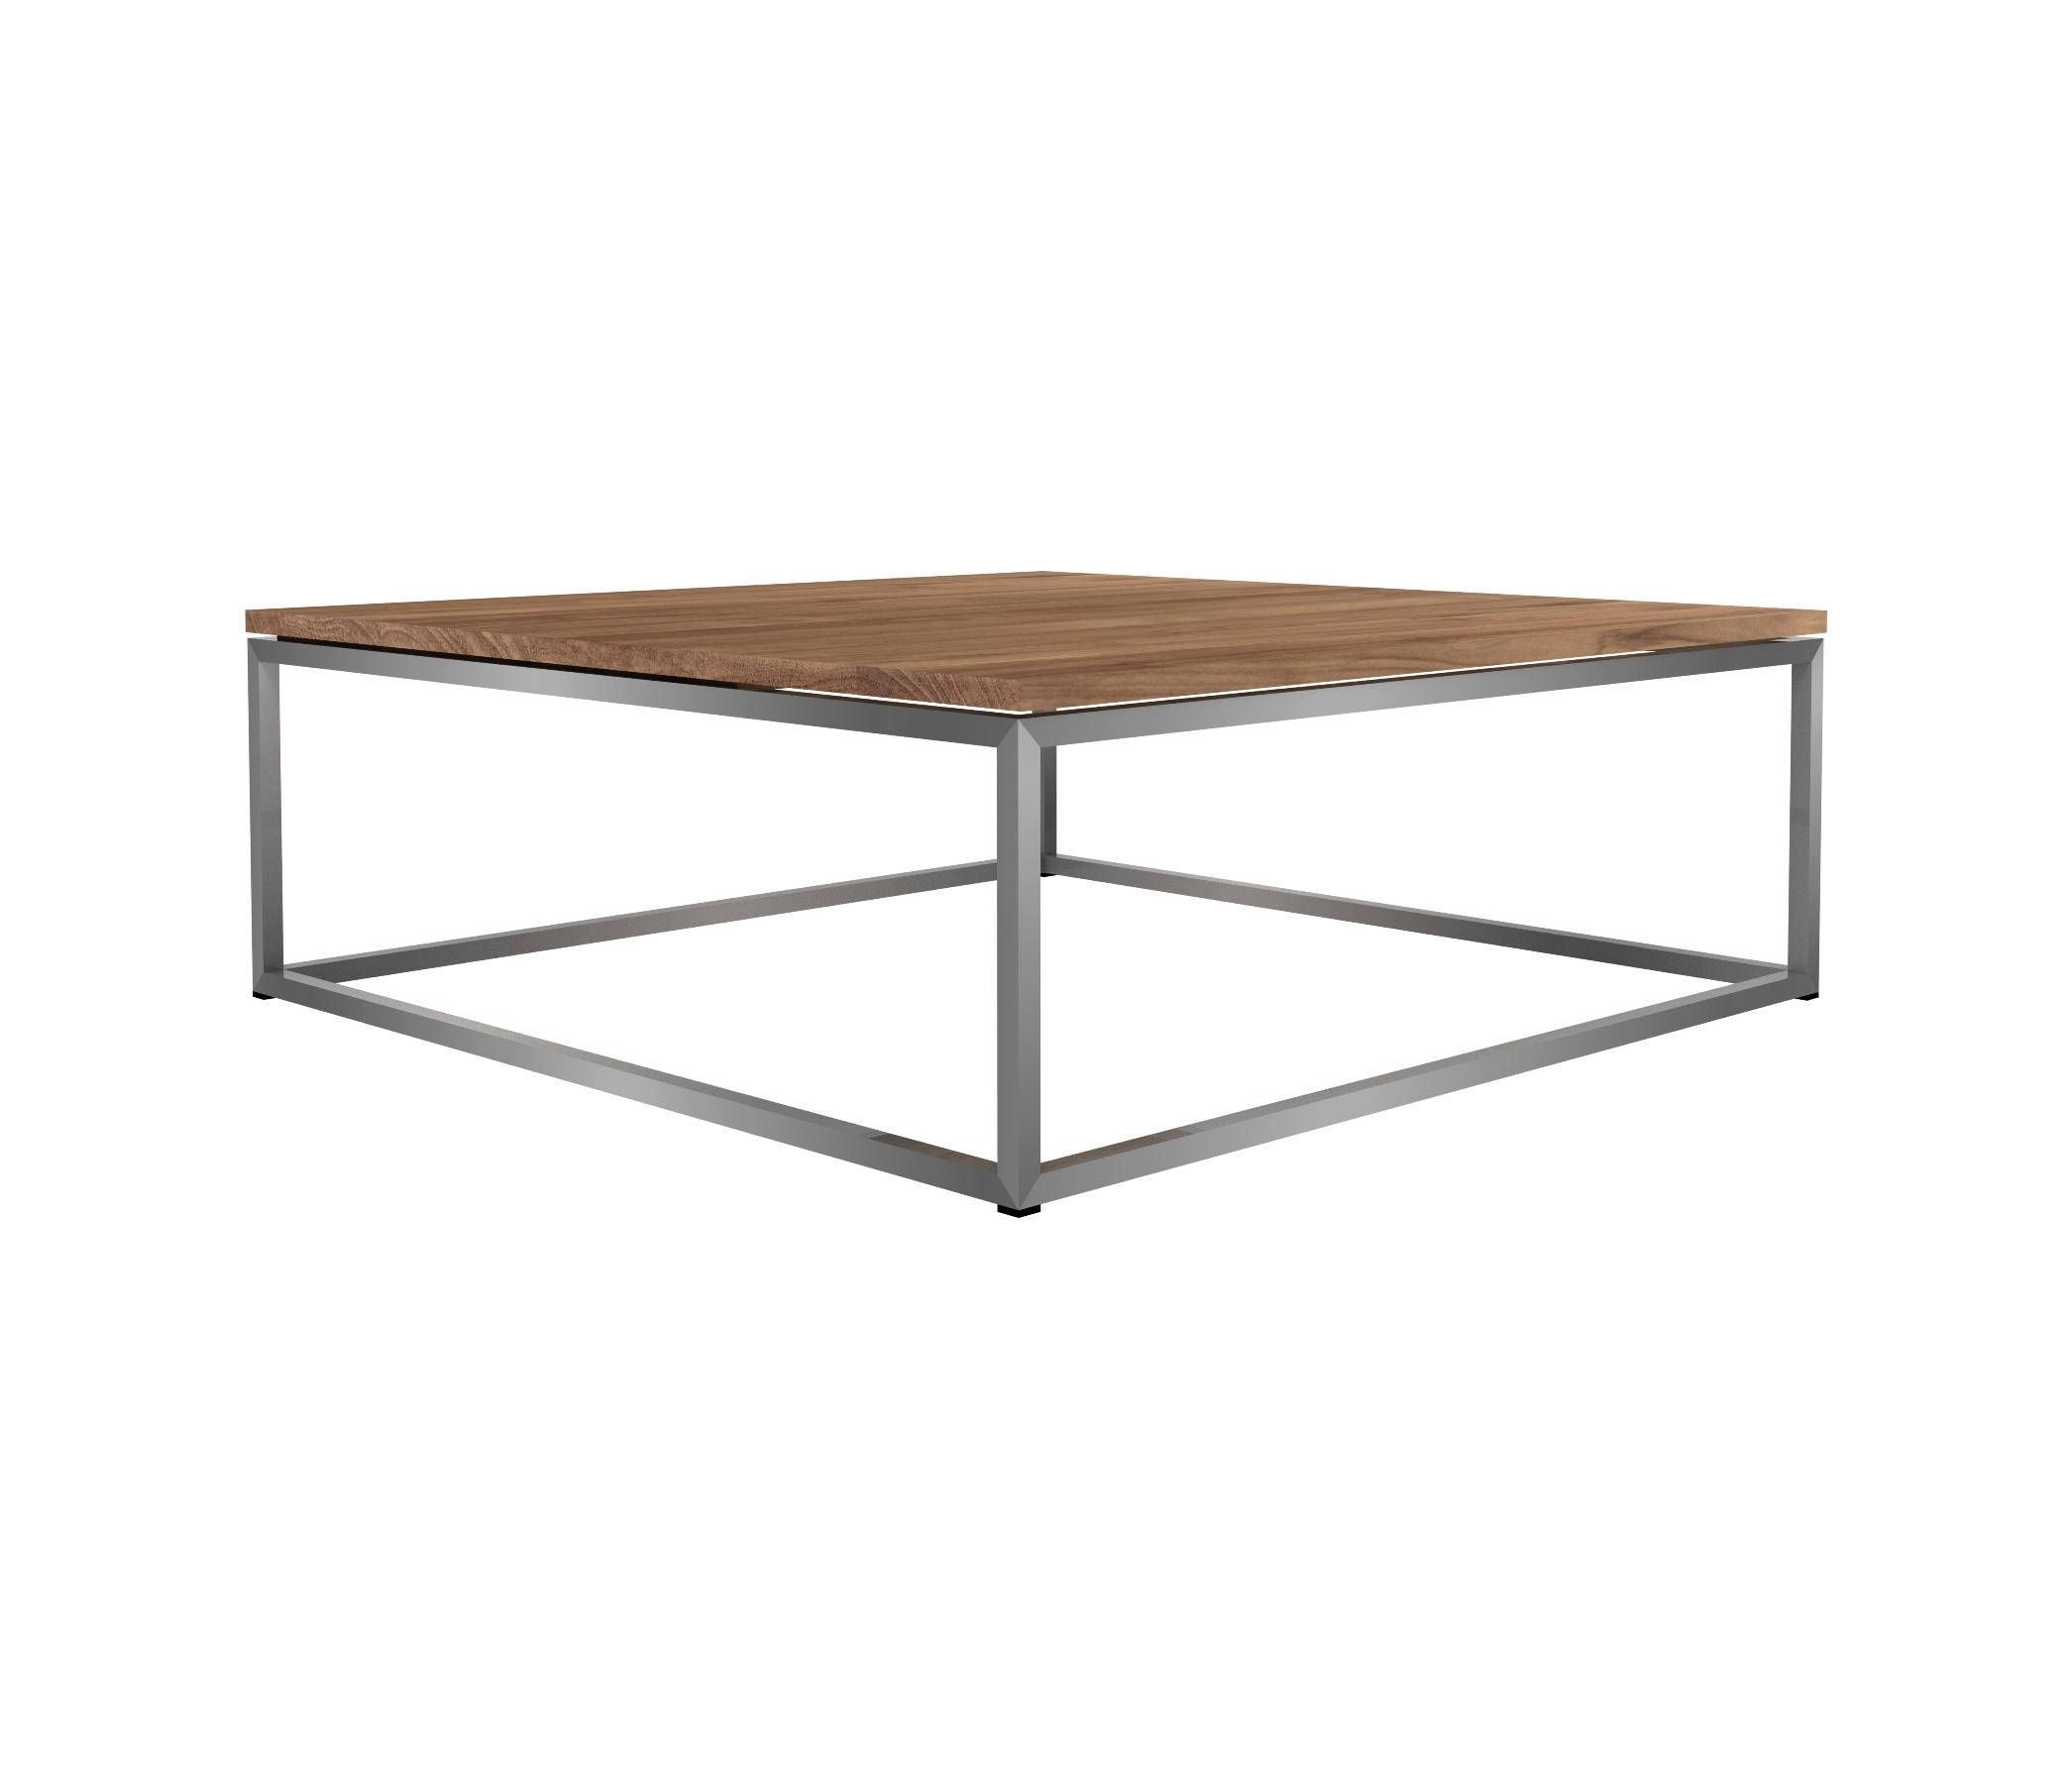 Teak Thin Coffee Table – Lounge Tables From Ethnicraft | Architonic Pertaining To Thin Coffee Tables (View 13 of 30)